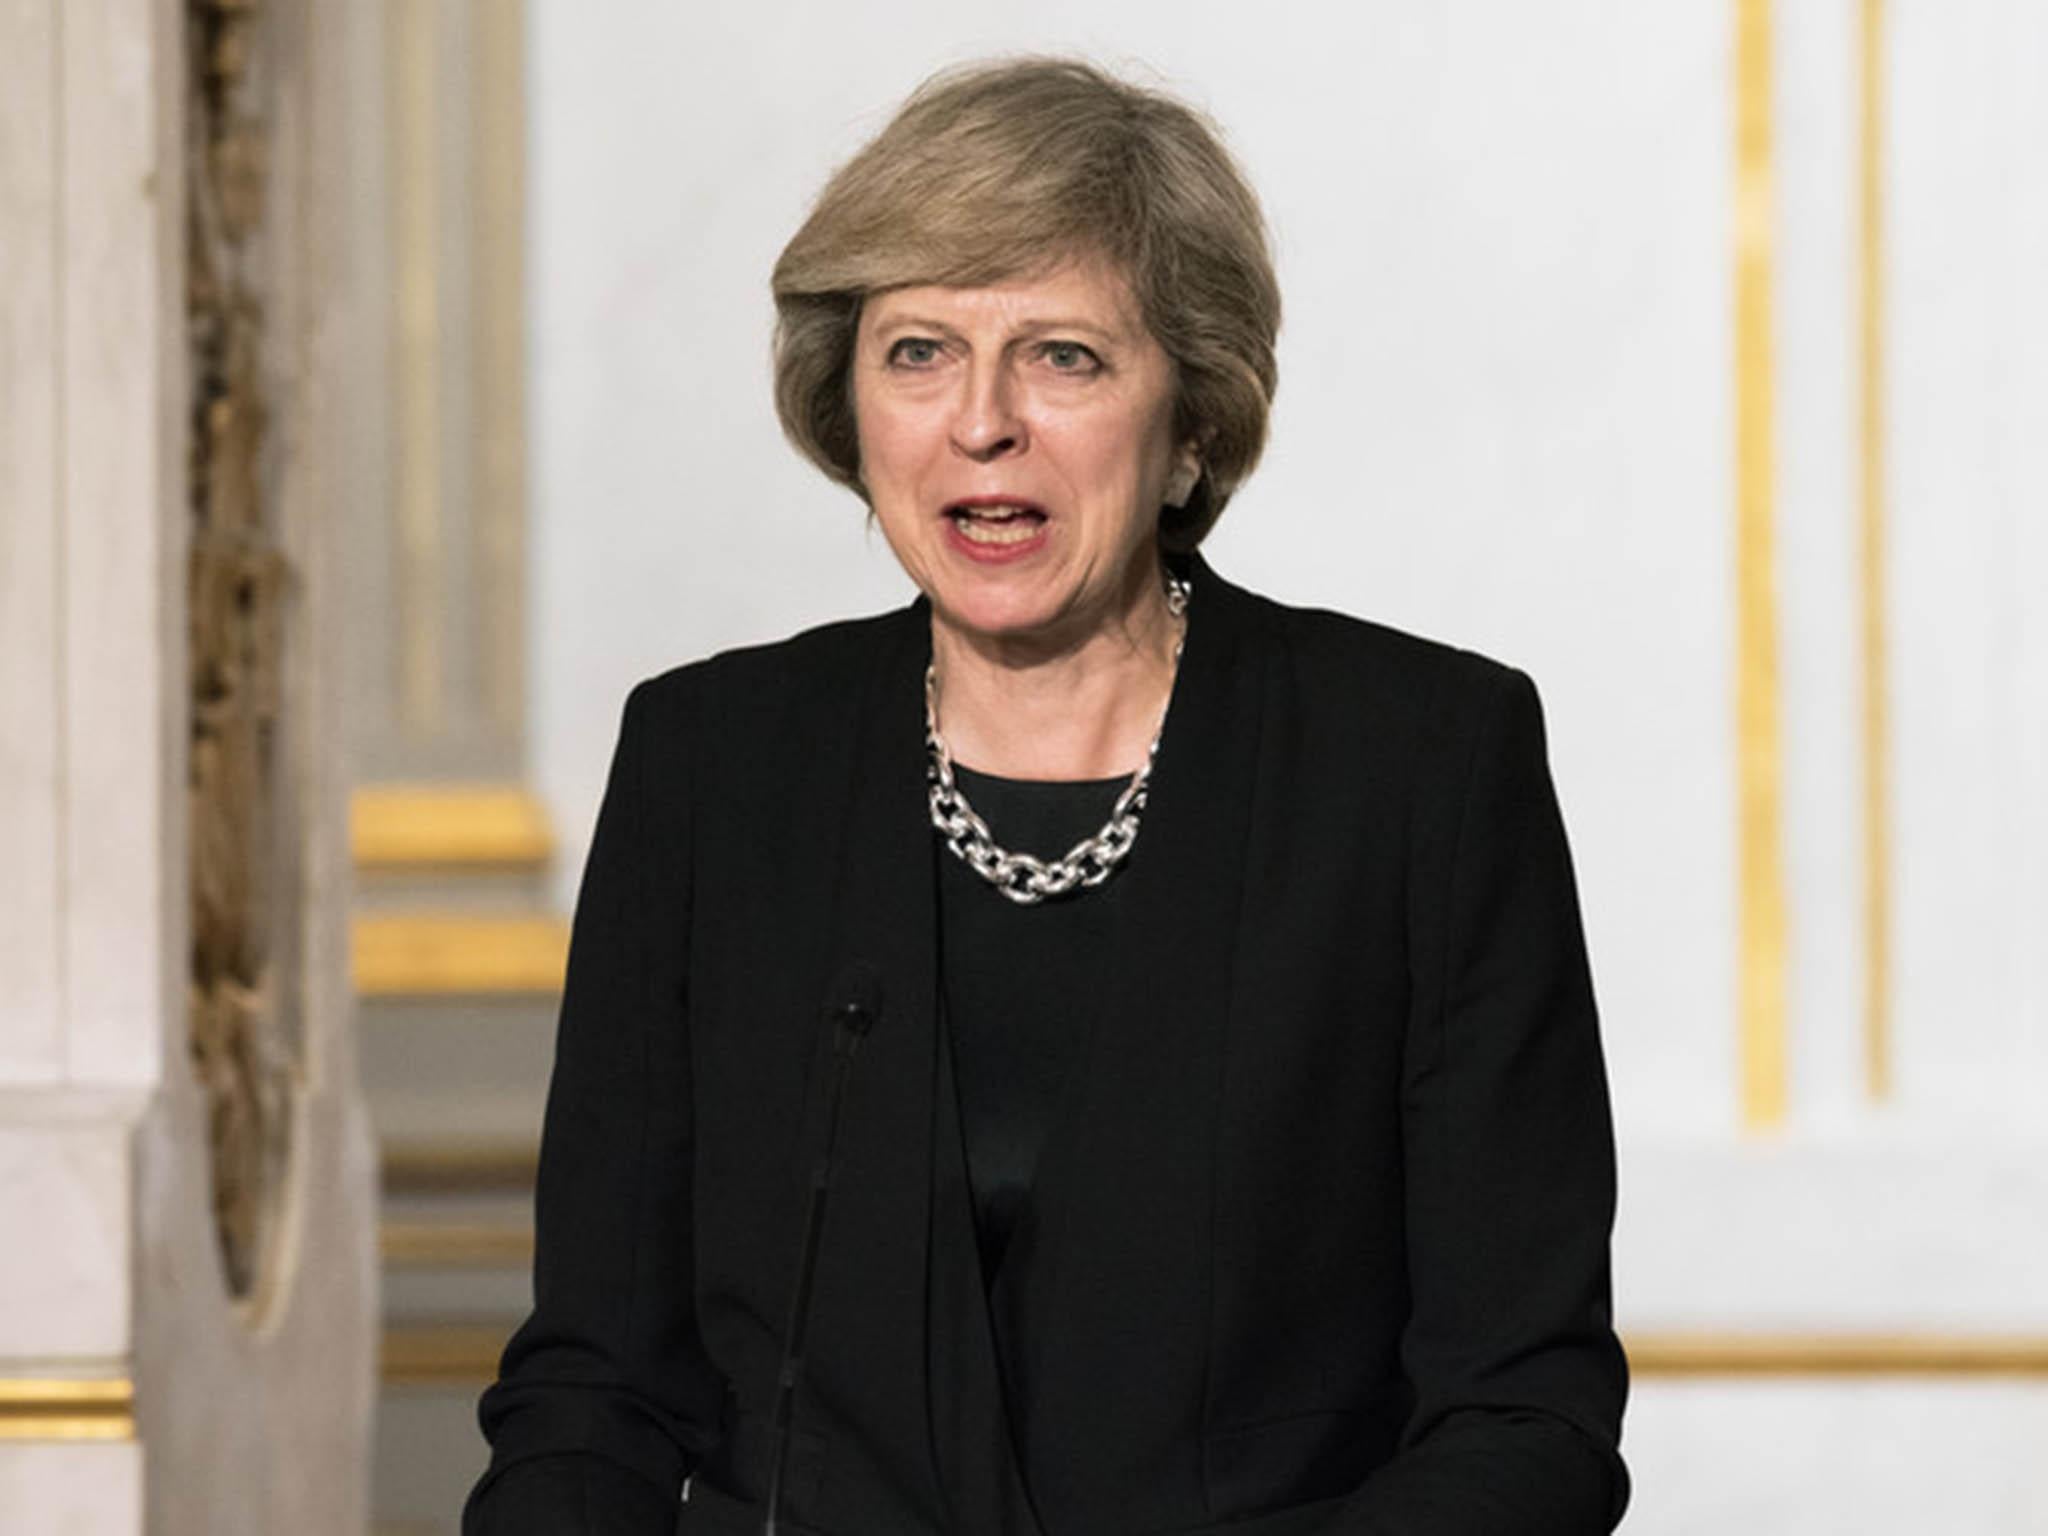 Theresa May reckons the only reason she’s Prime Minister is because she went to grammar school (Shutterstock)